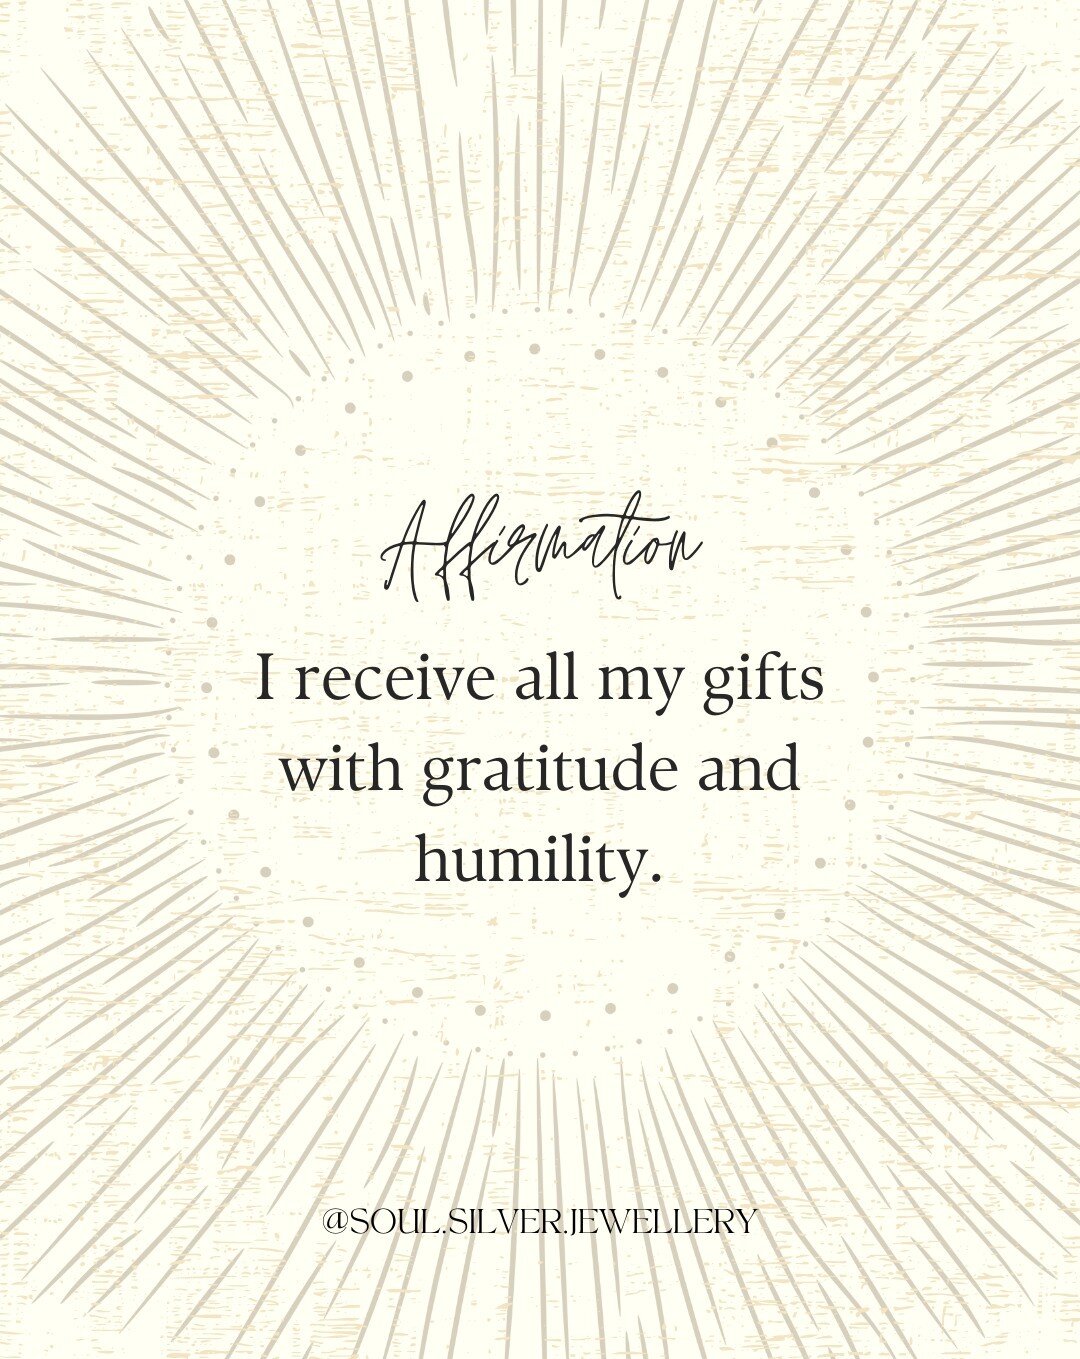 Affirm it ::: 
I receive all my gifts with gratitude and humility. 

#affirmations #dailyaffirmation #dailyaffirmations #affirmationoftheday #sunshinecoastbusiness